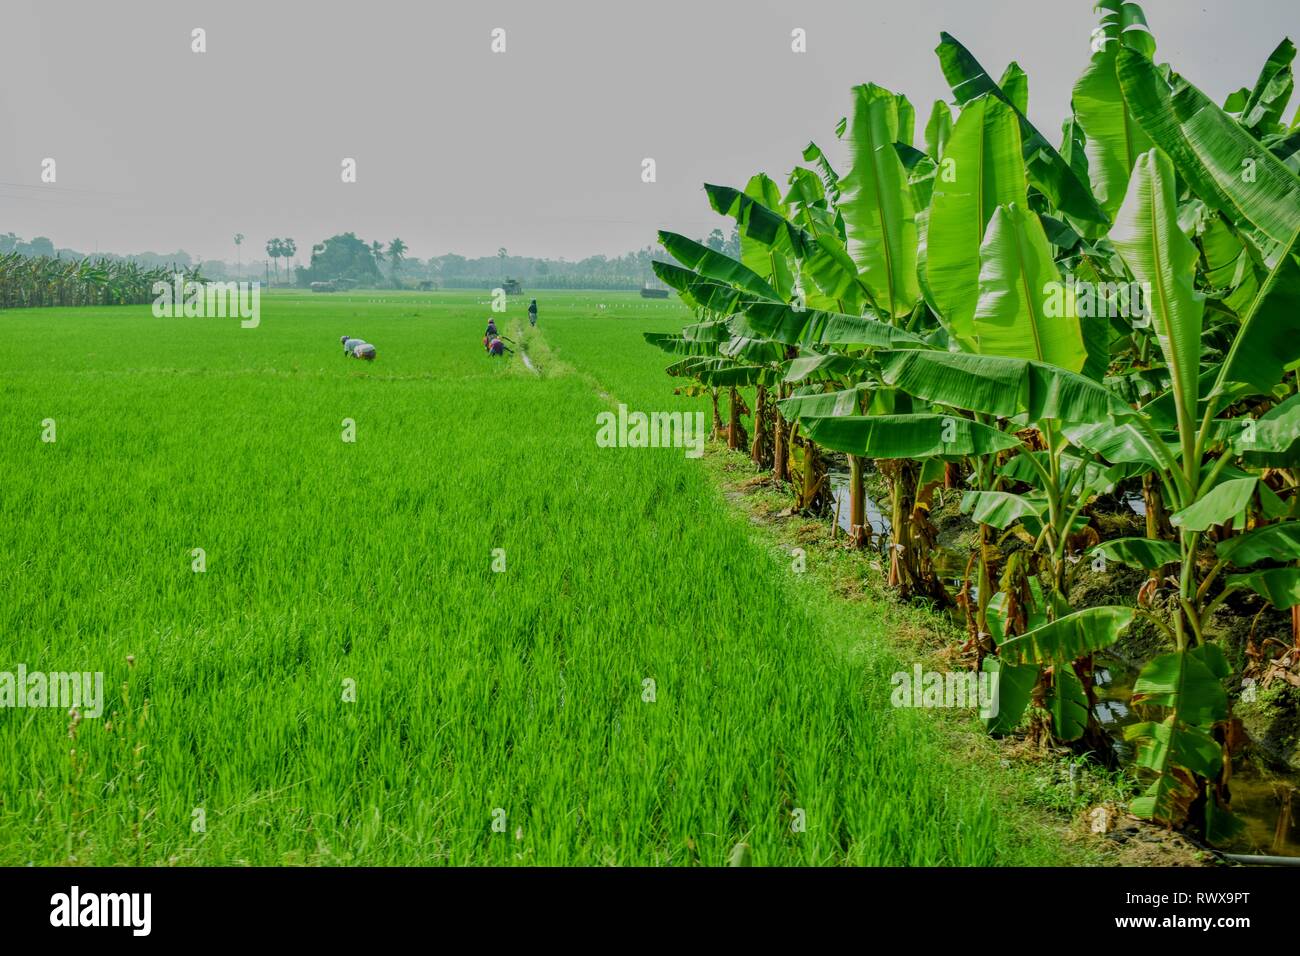 #Indian Agriculture  #Banana Plantation #Paddy Farming #save agriculture Stock Photo